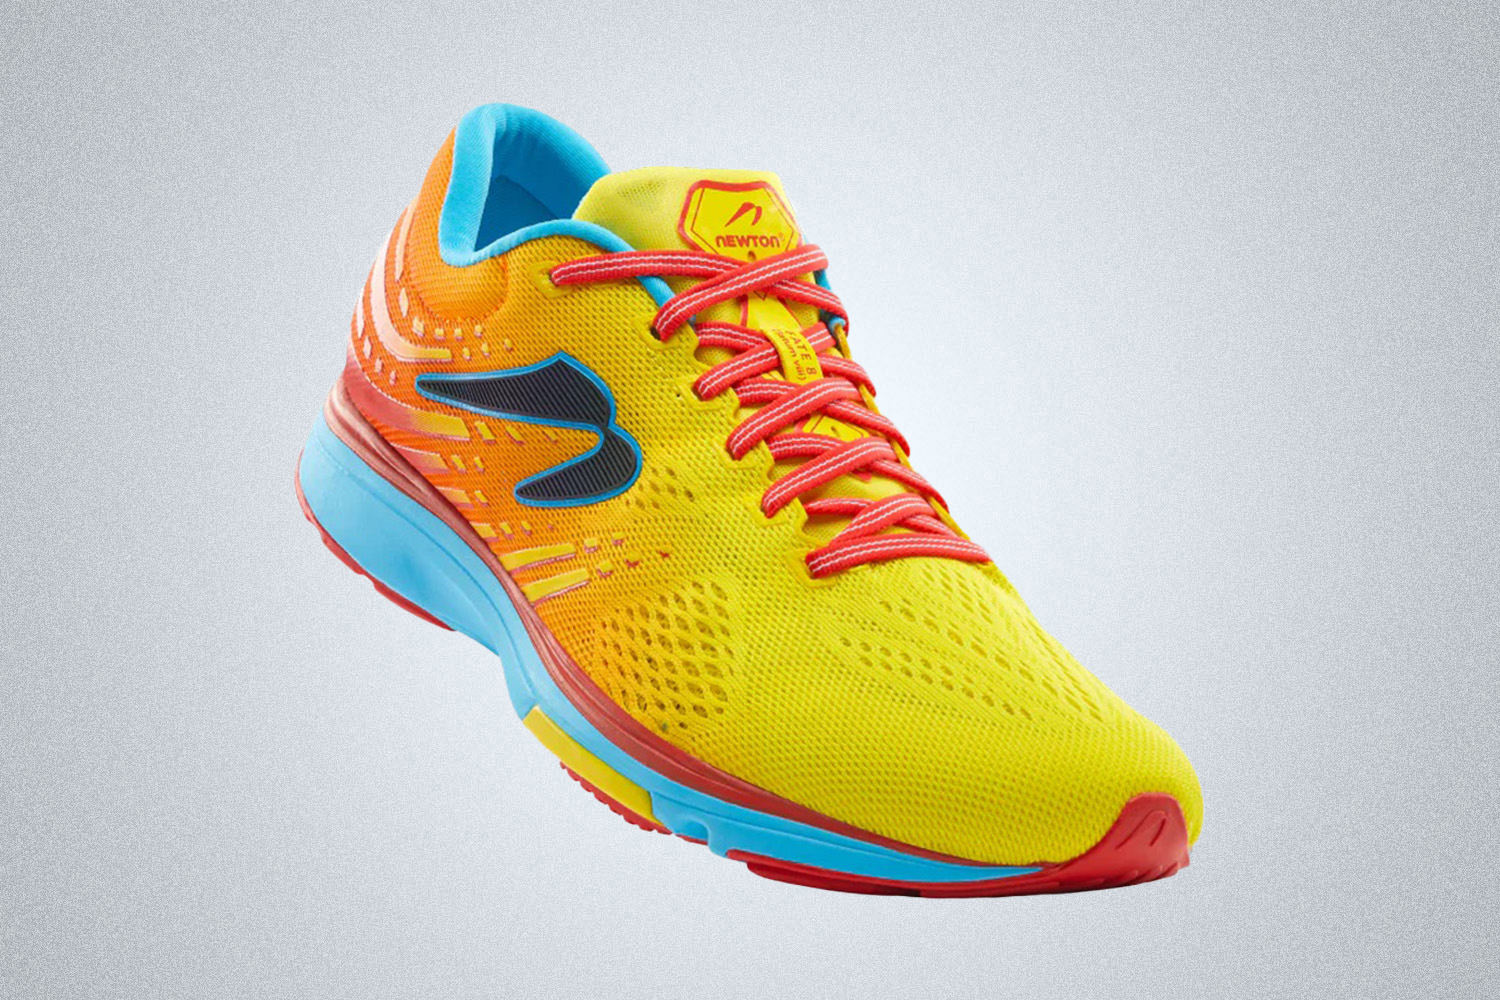 a yellow, orange and blue cushioned running shoe from Newton on a grey background